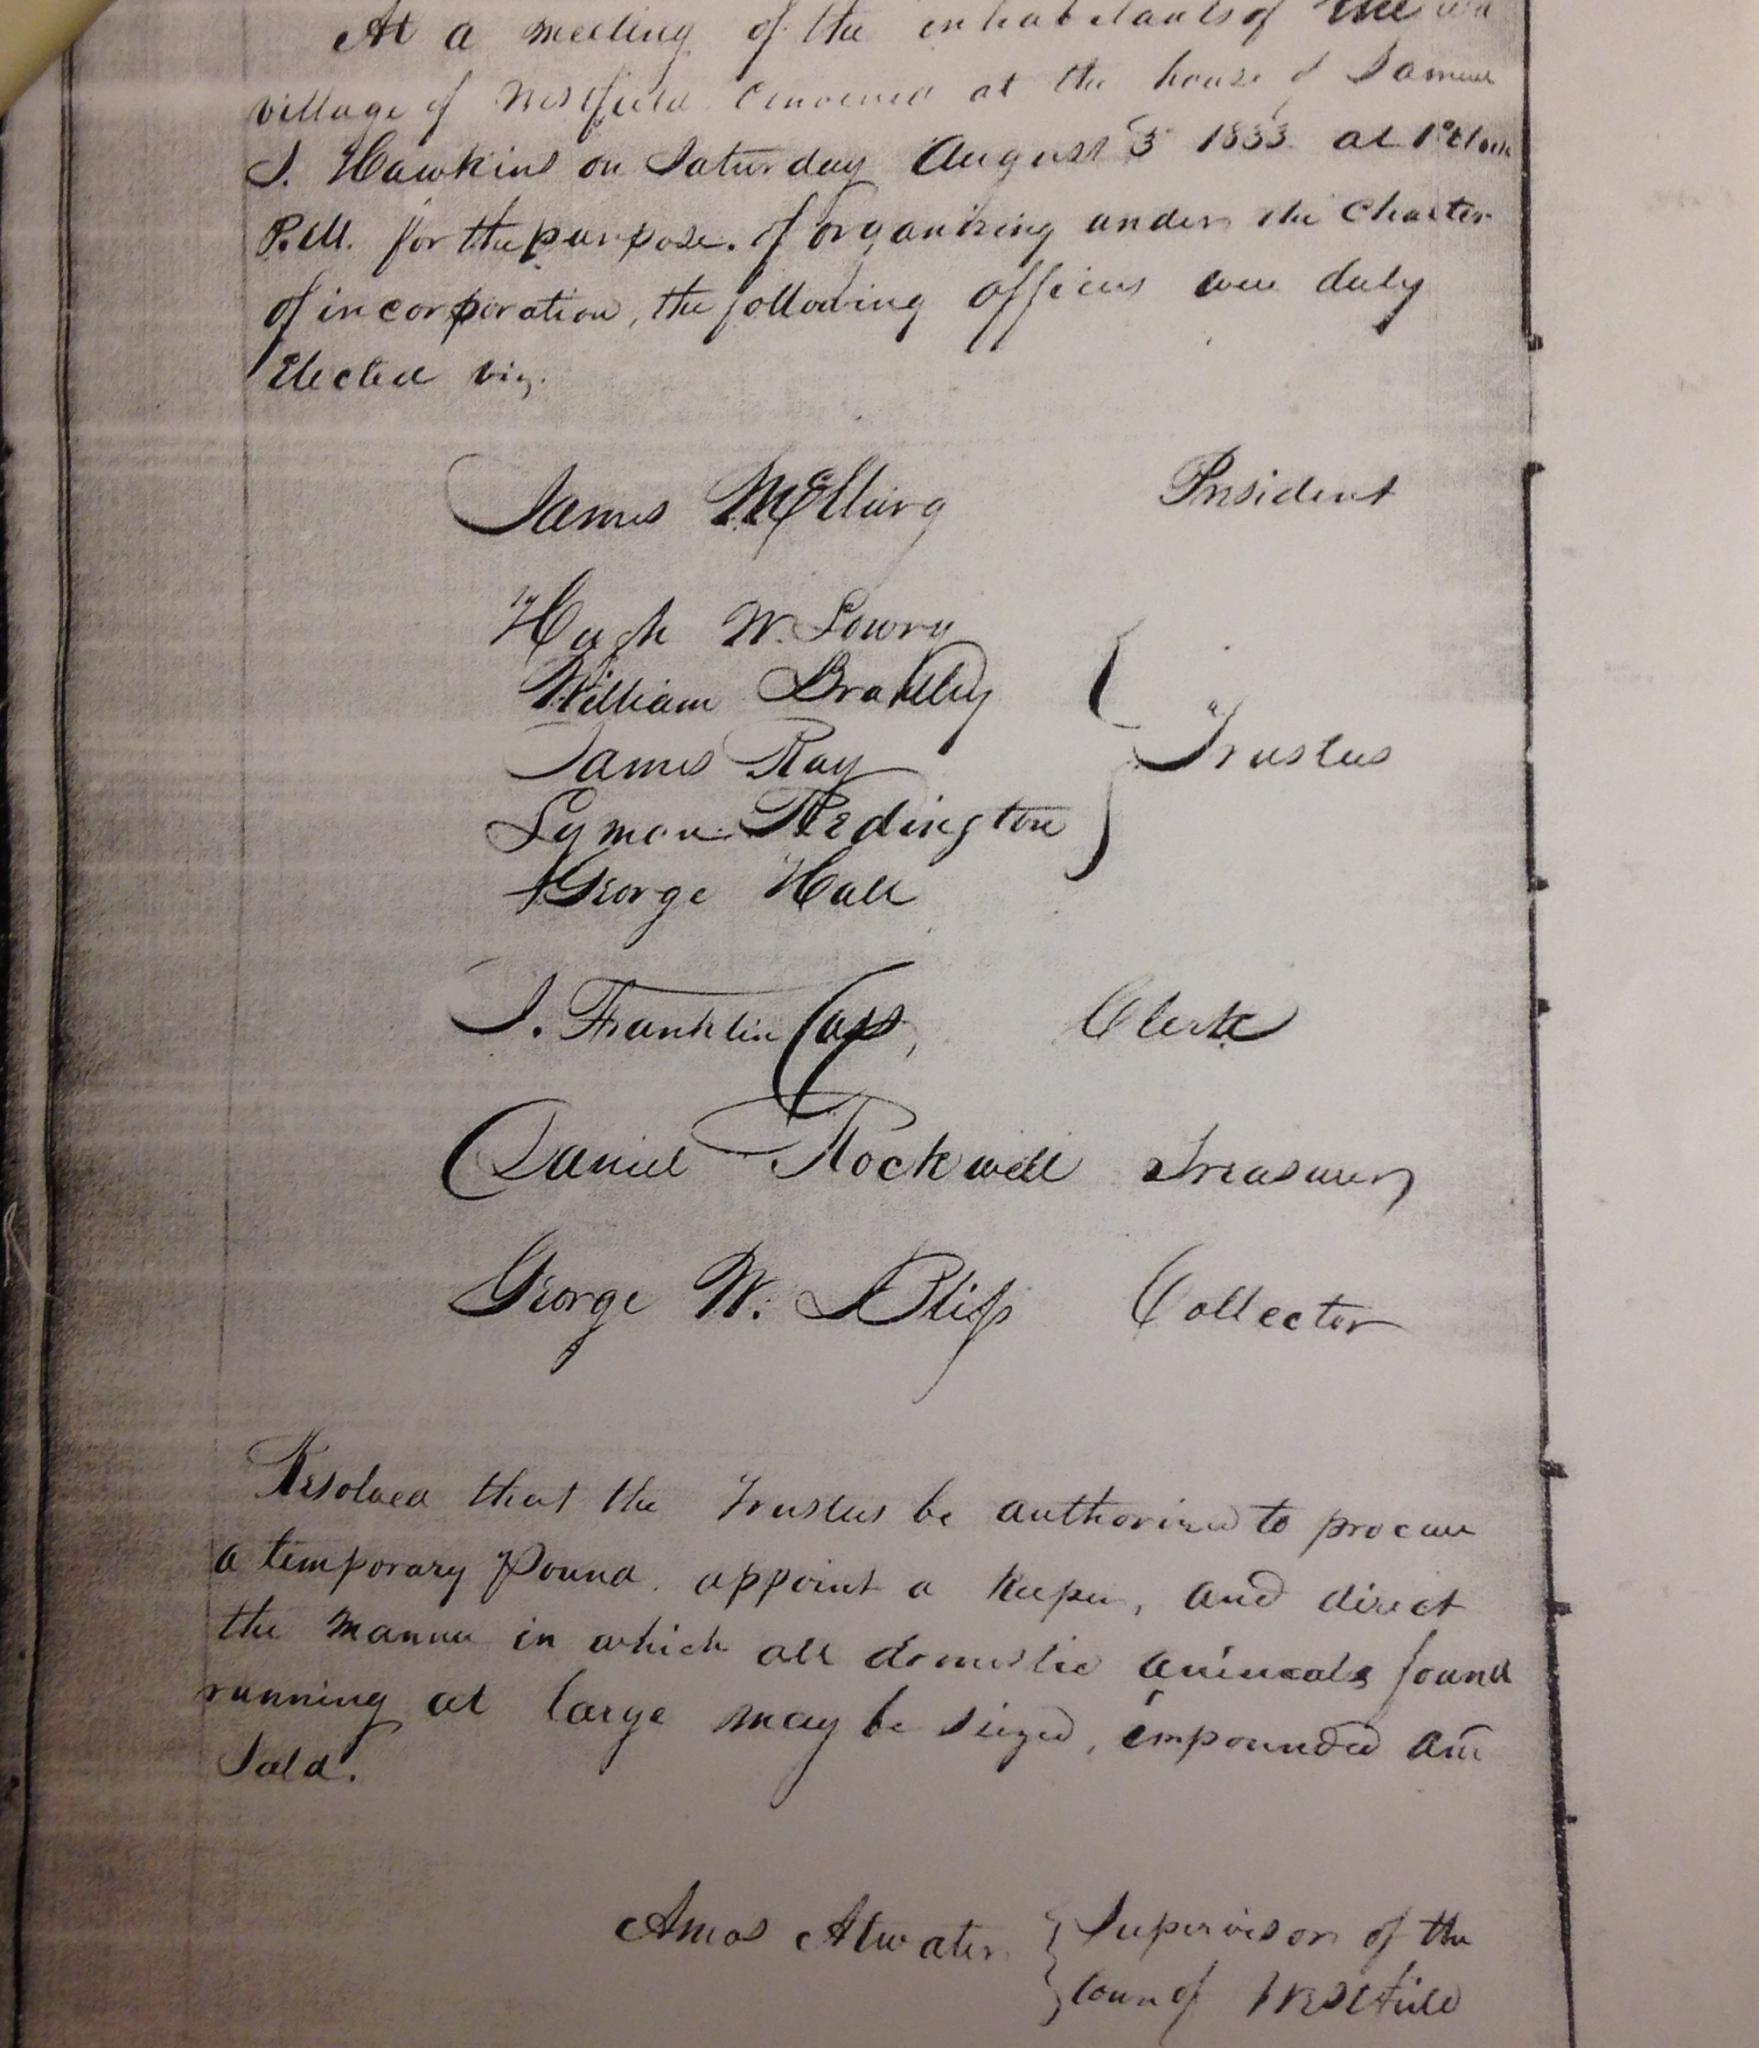 A page from the first record book of the Village of Westfield from 1833 showing the results of the first election held to elect officers including the President, which was the title of the Mayor until changed by NY State law in 1927.